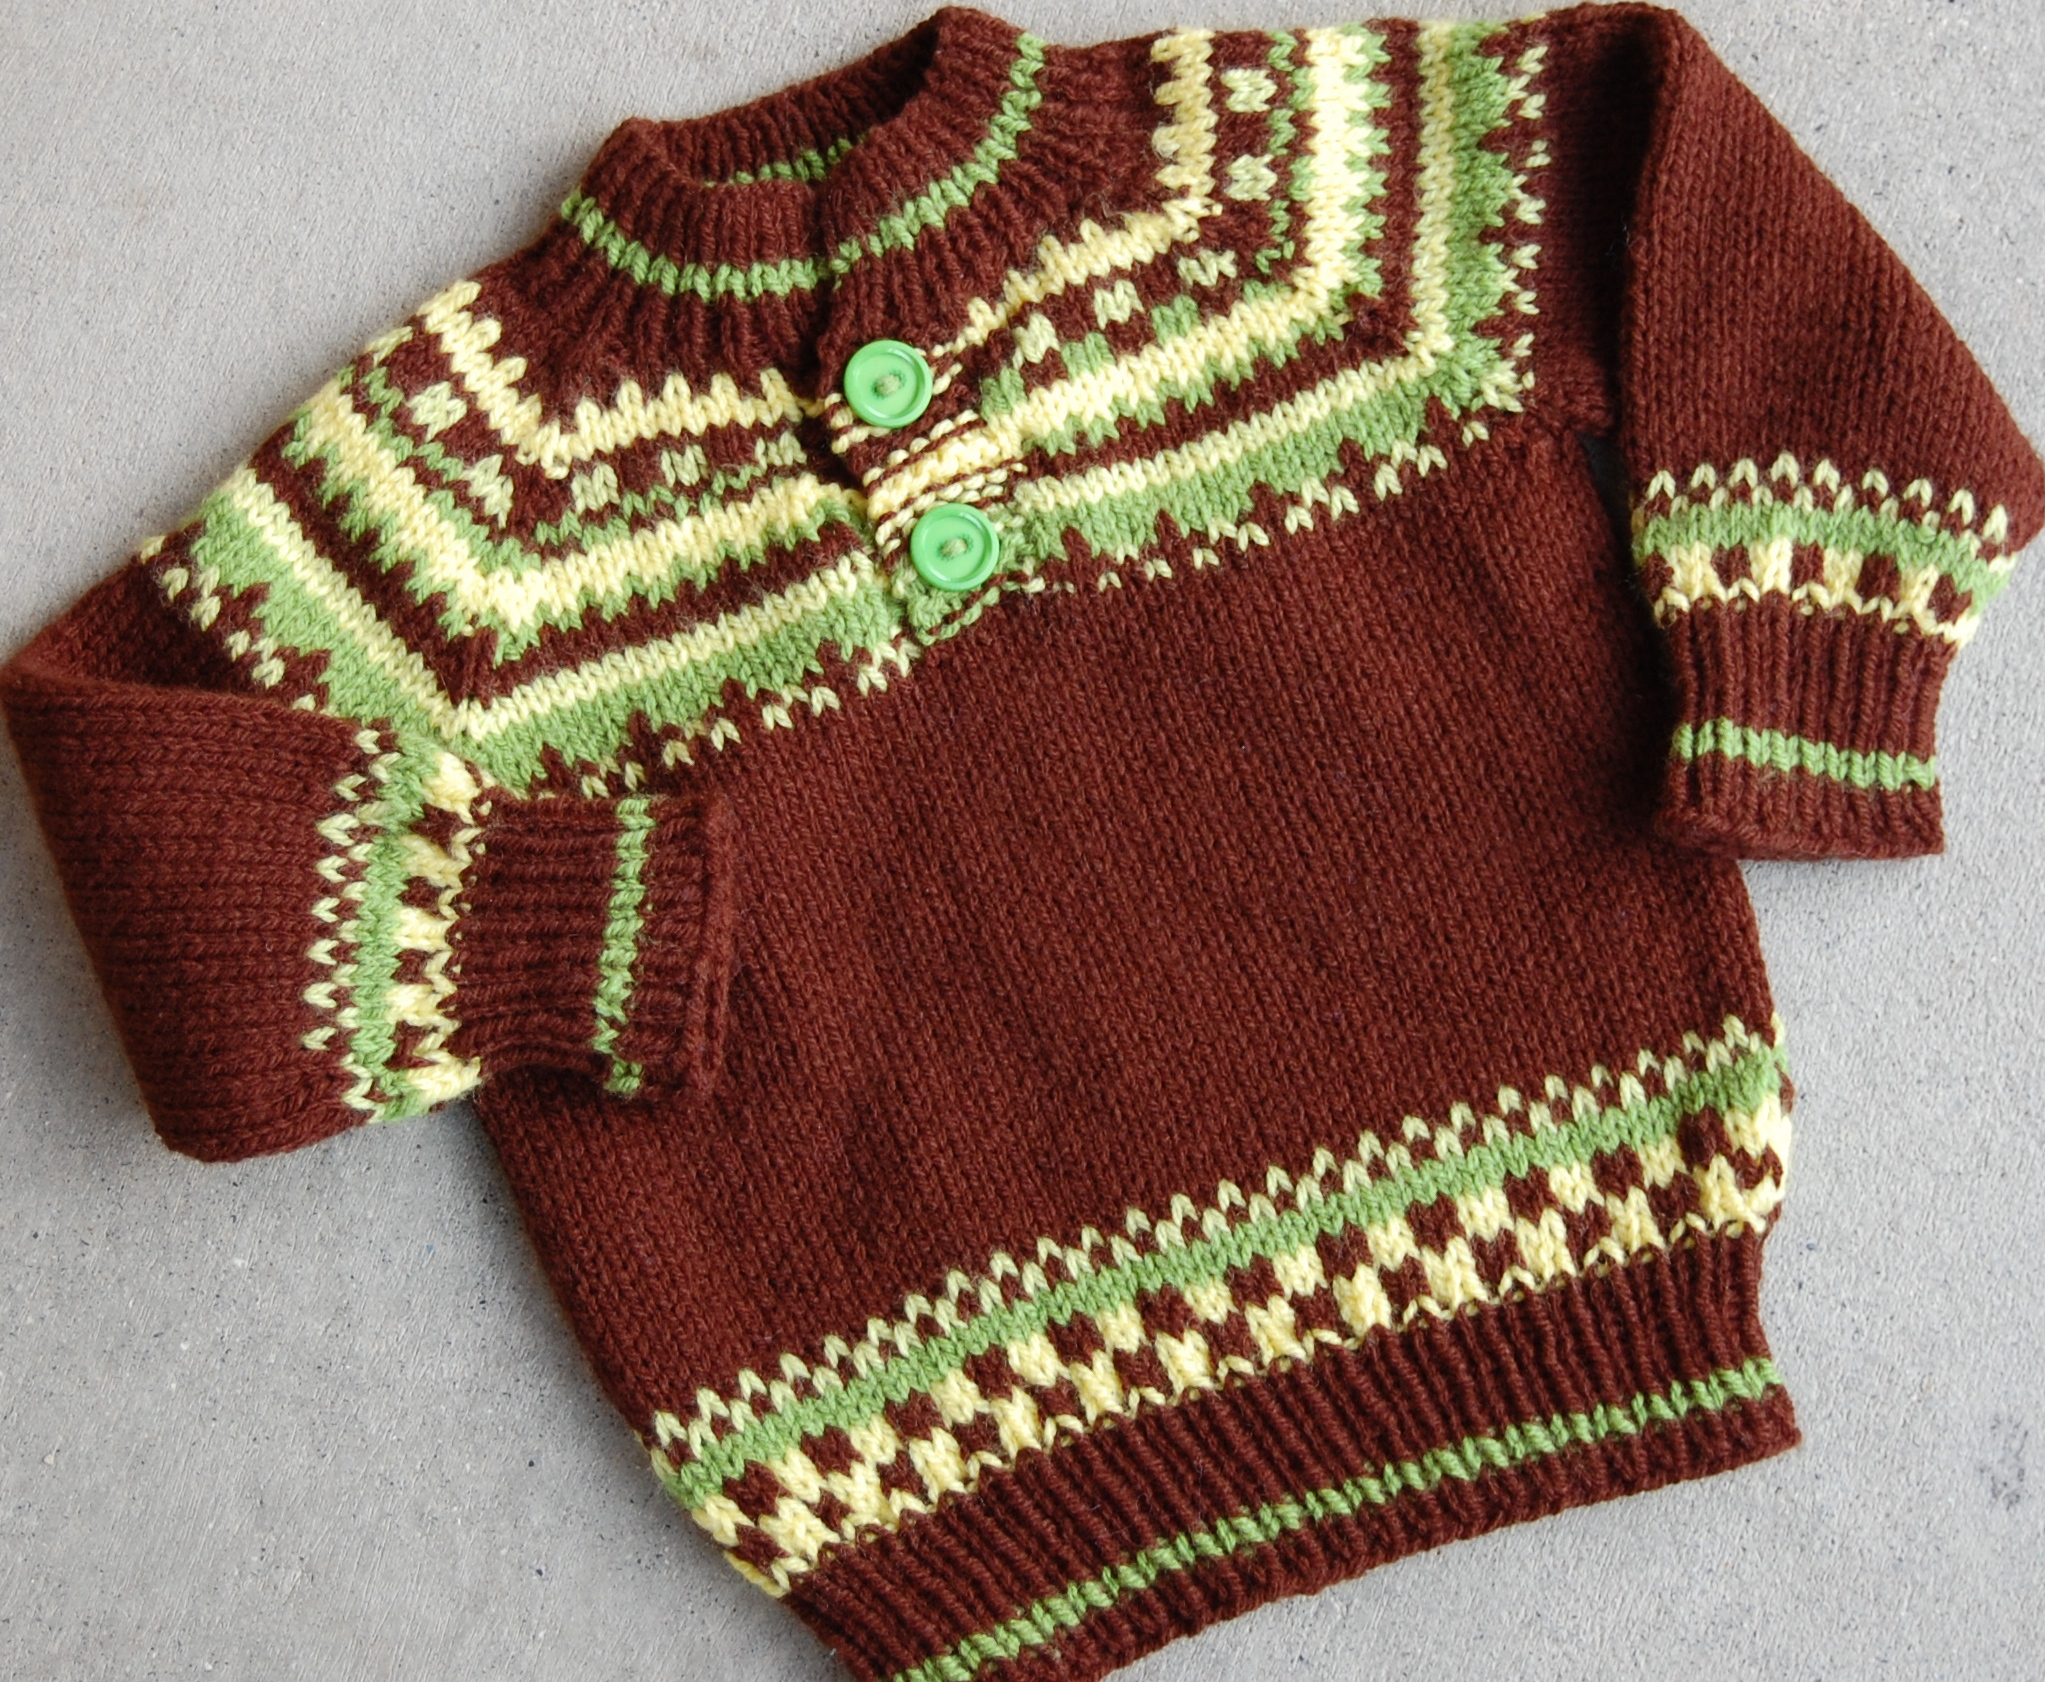 Knitted Childrens Sweaters Free Patterns Richdesigns Onepieceknitting